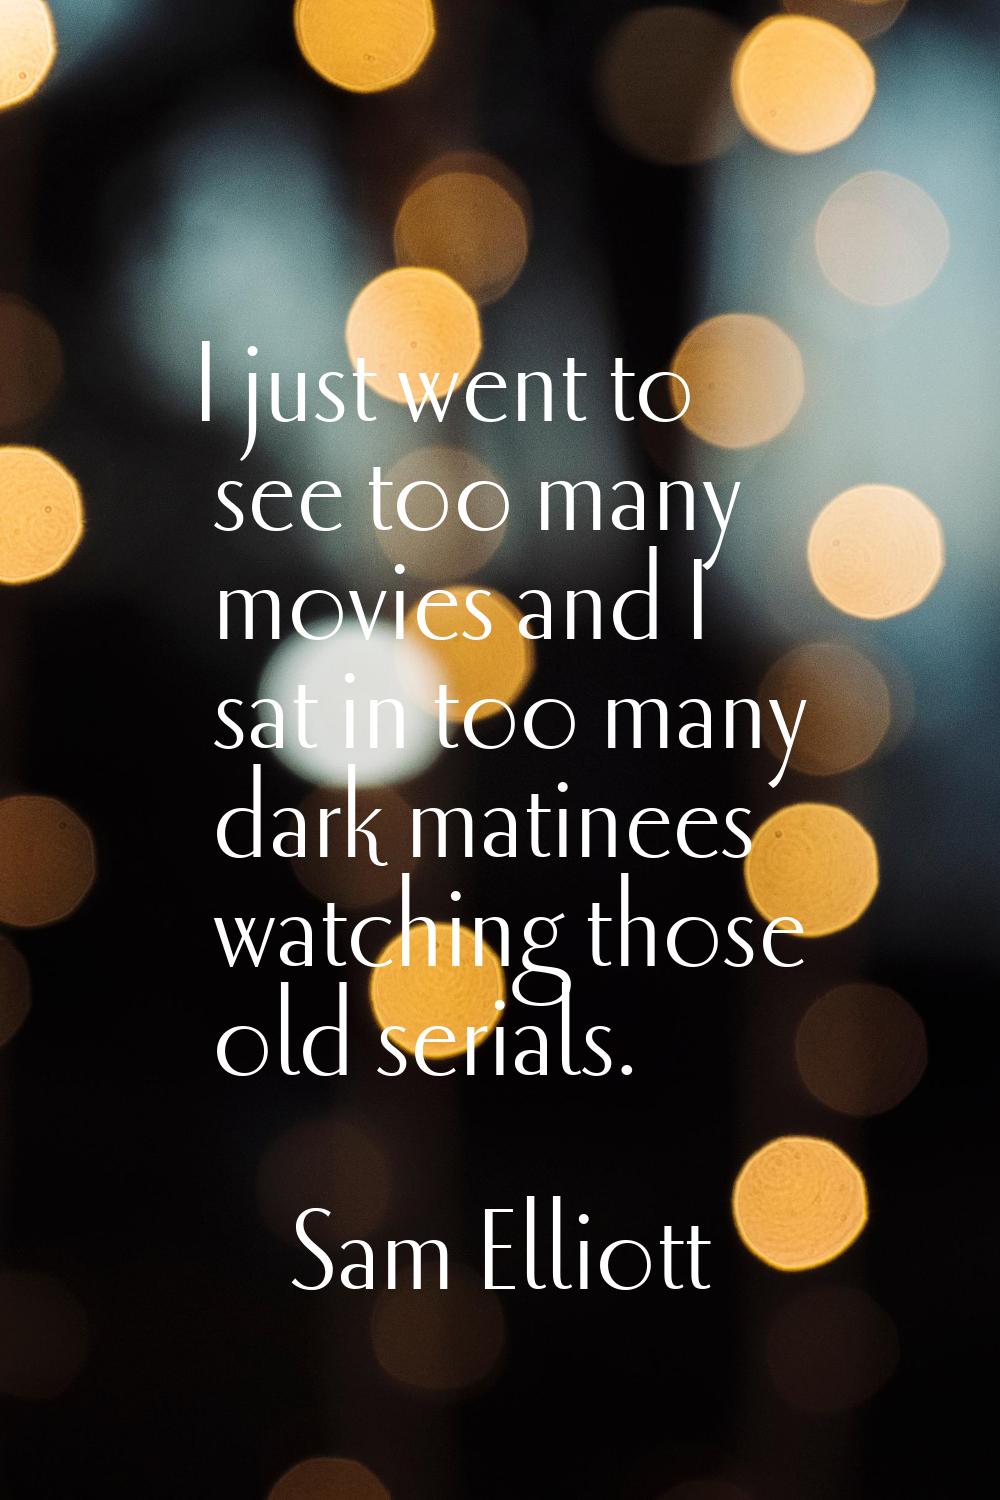 I just went to see too many movies and I sat in too many dark matinees watching those old serials.